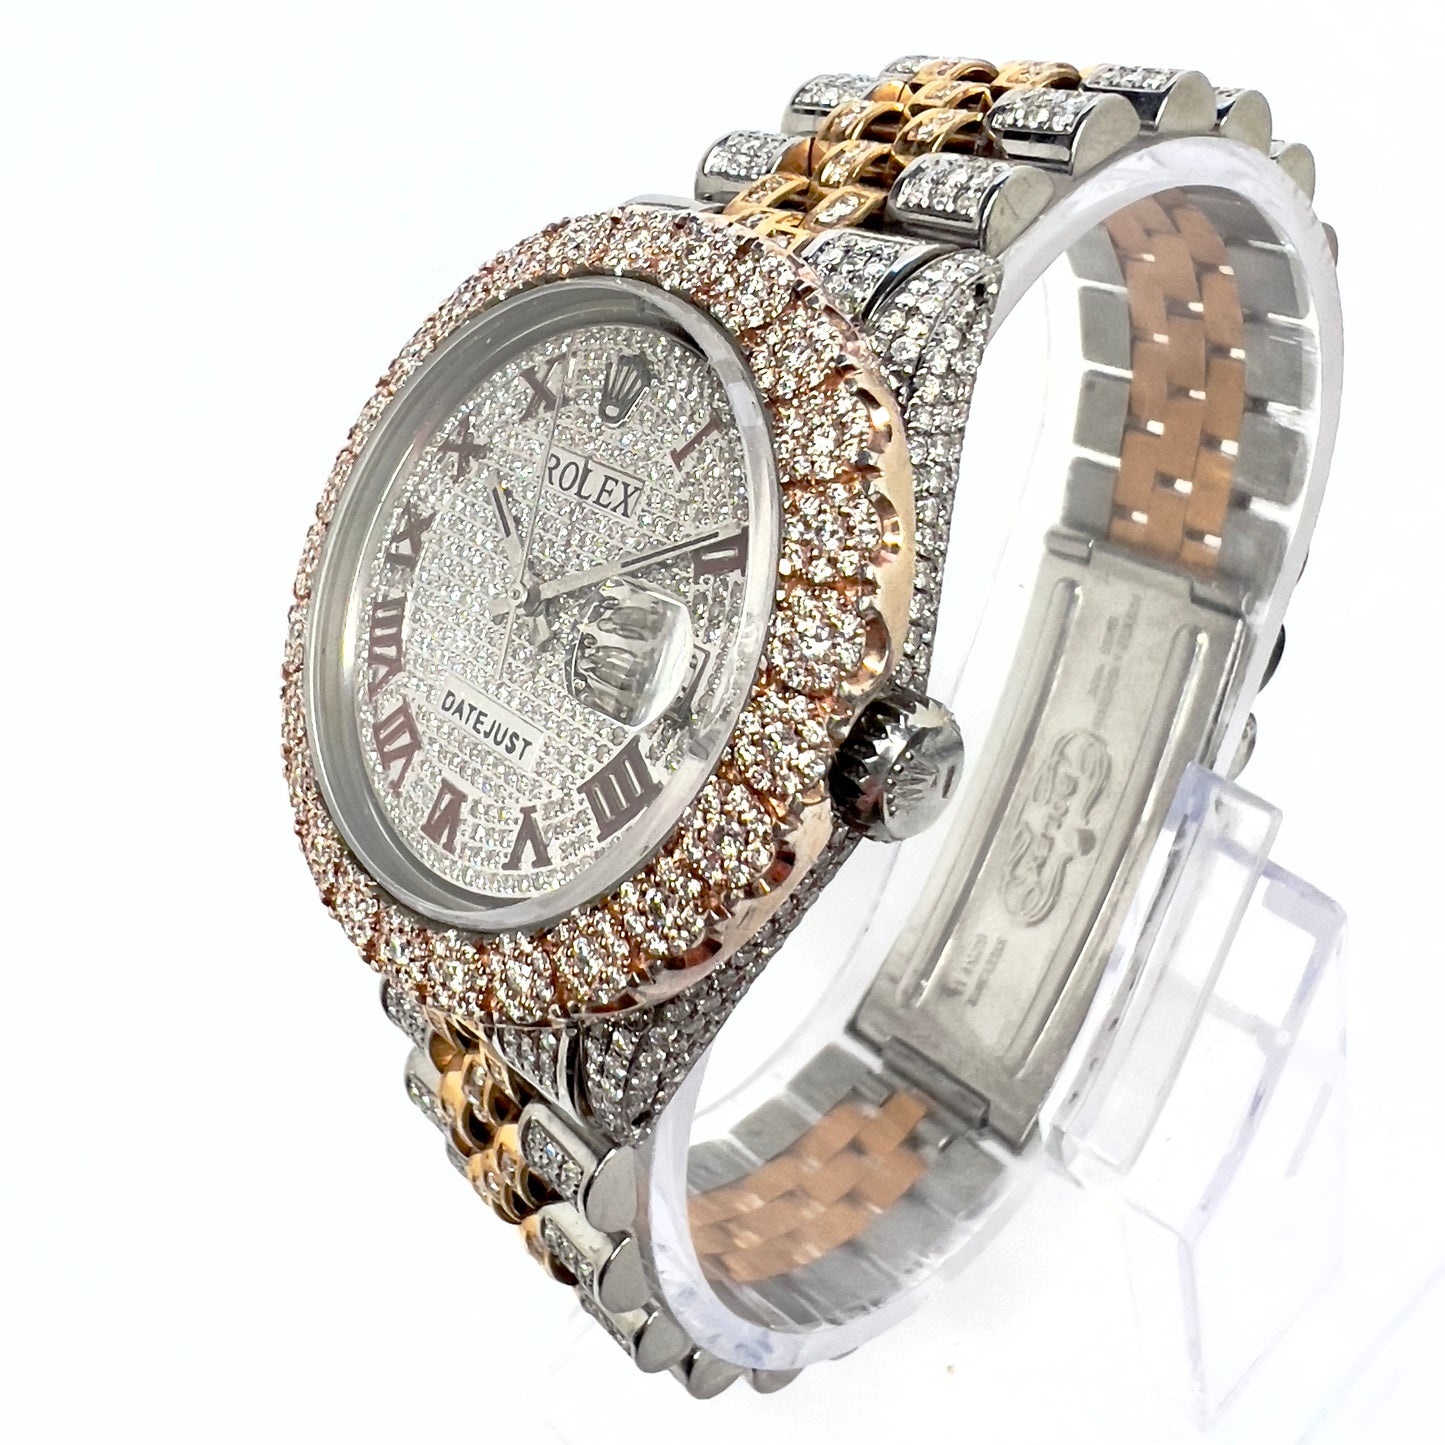 ROLEX Oyster Perpetual DATEJUST Automatic 36mm 2 Tone Full Diamond Watch